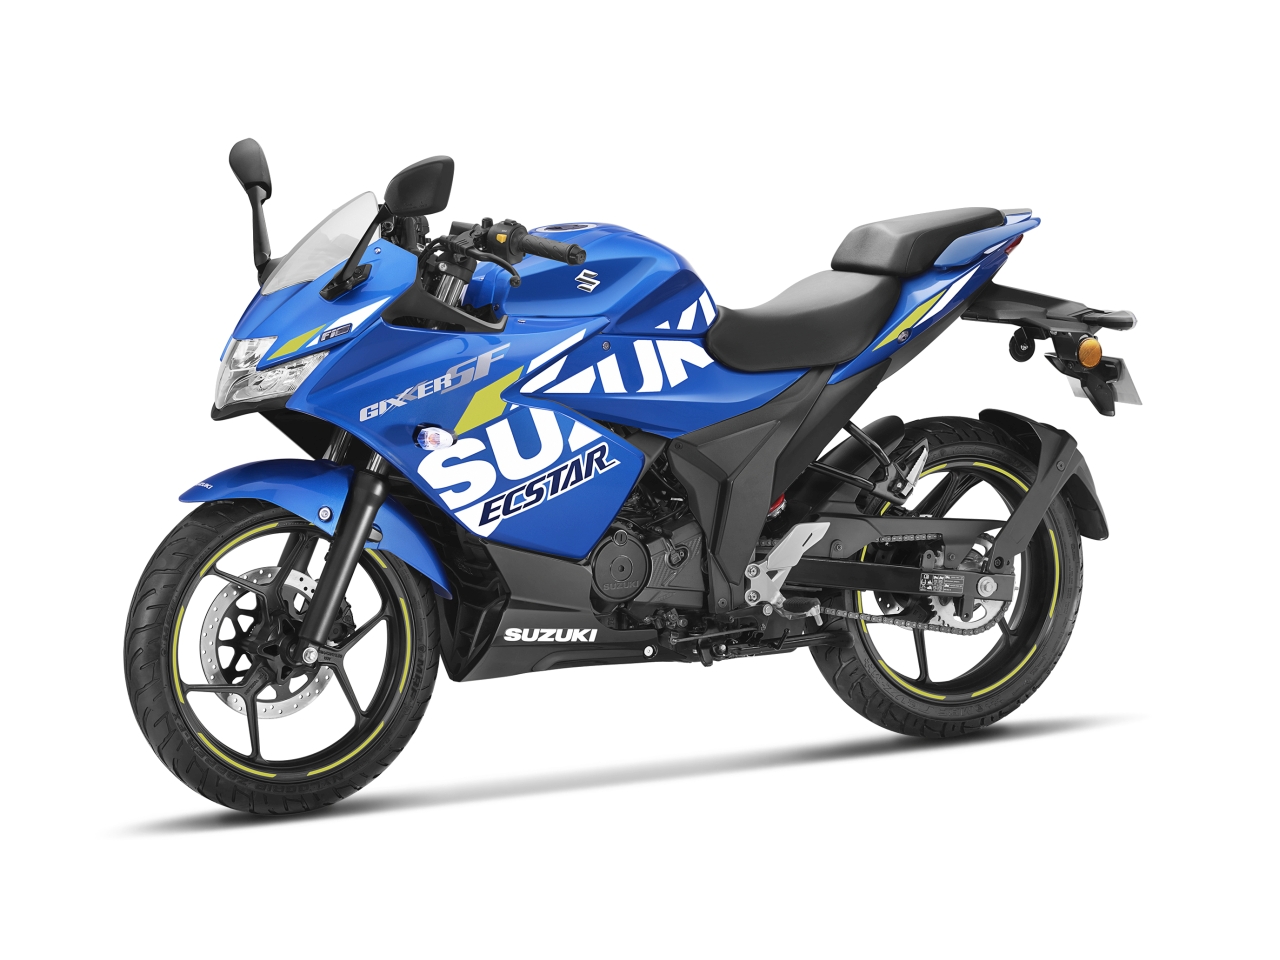 Suzuki Gixxer SF MotoGP edition launched, 250 cc variant to arrive in